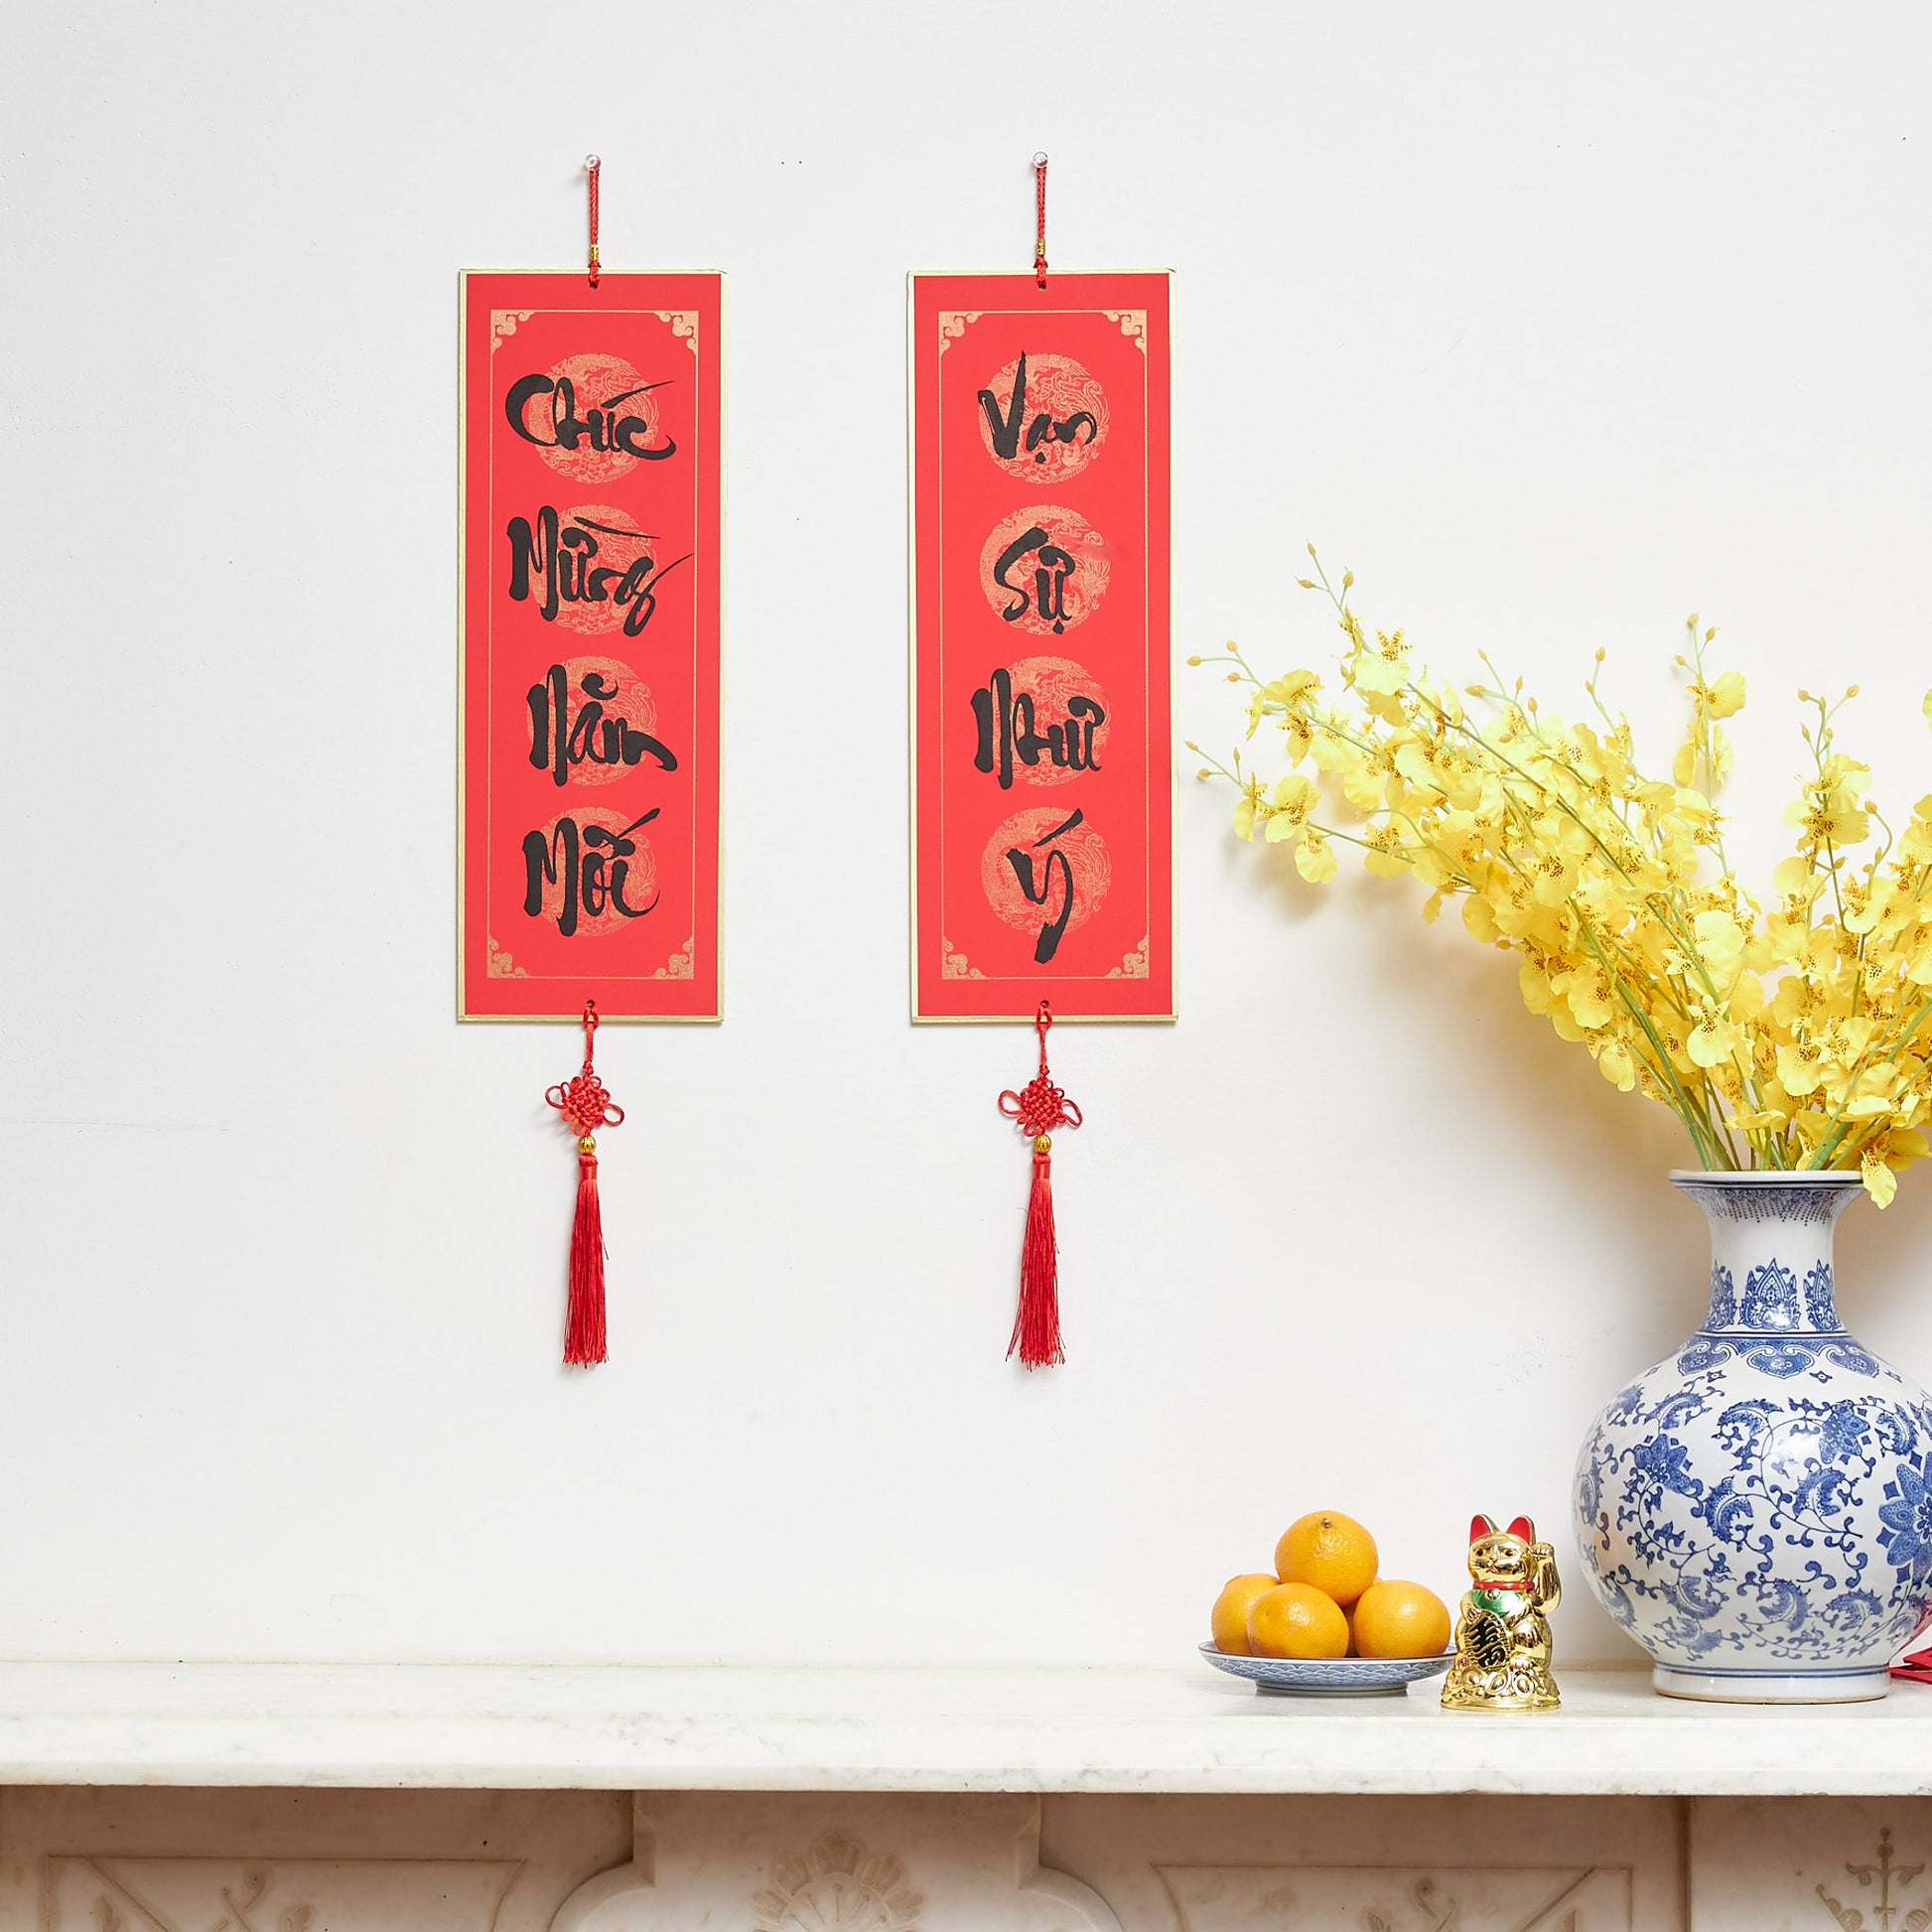 Lunar New Year, Chinese New Year, Vietnamese New Year, Tet decorations